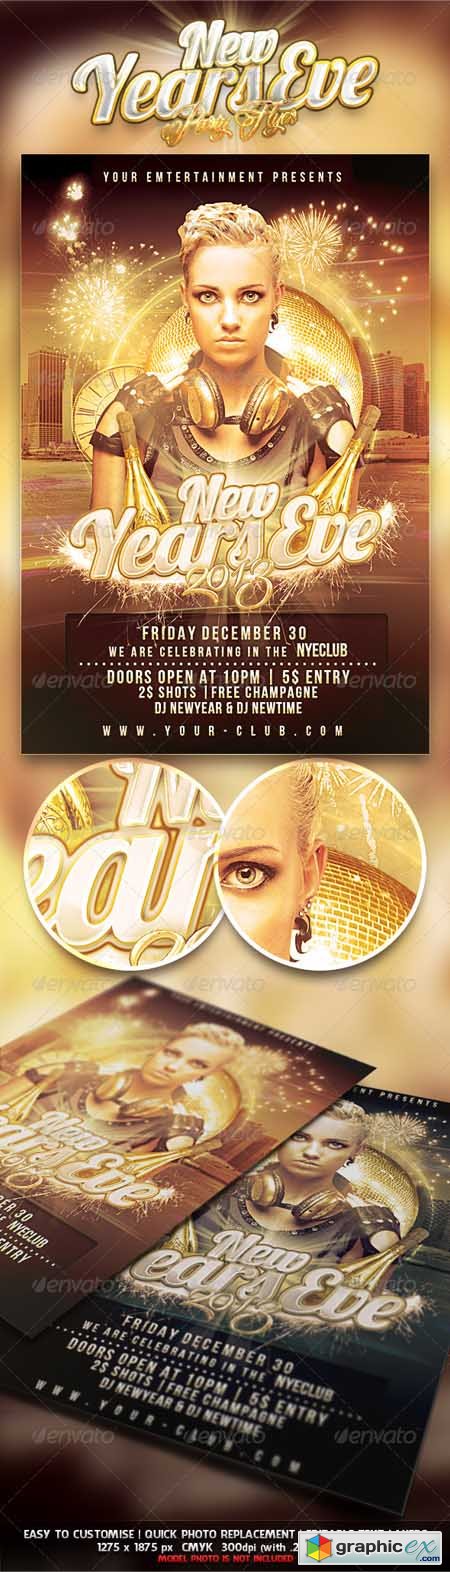 New Years Eve Party Flyer 3526475